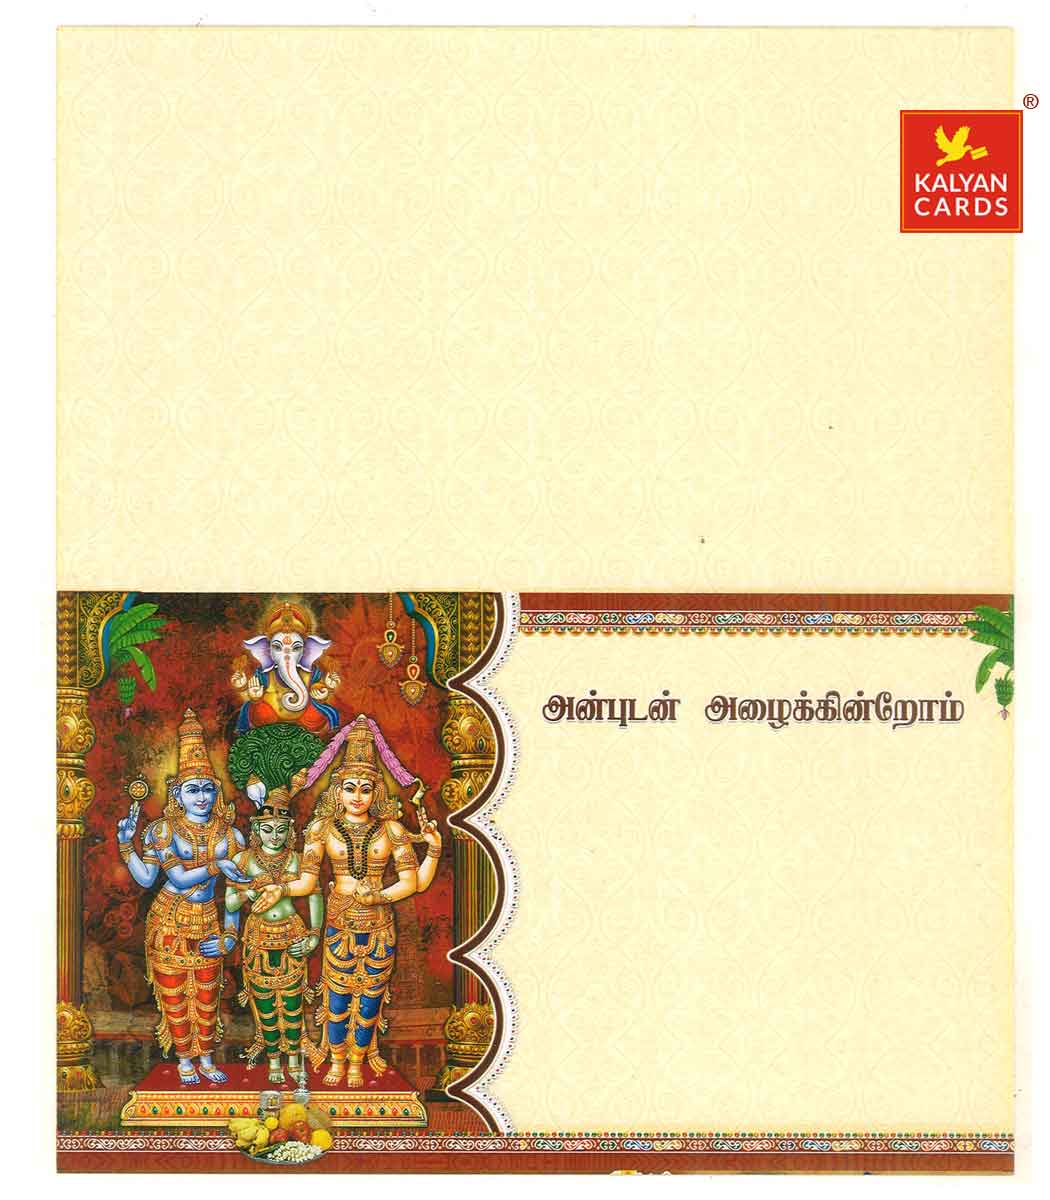 Tamil Marriage Invitation Card Design Online At Lowest Price,Bleach T Shirt Design Ideas